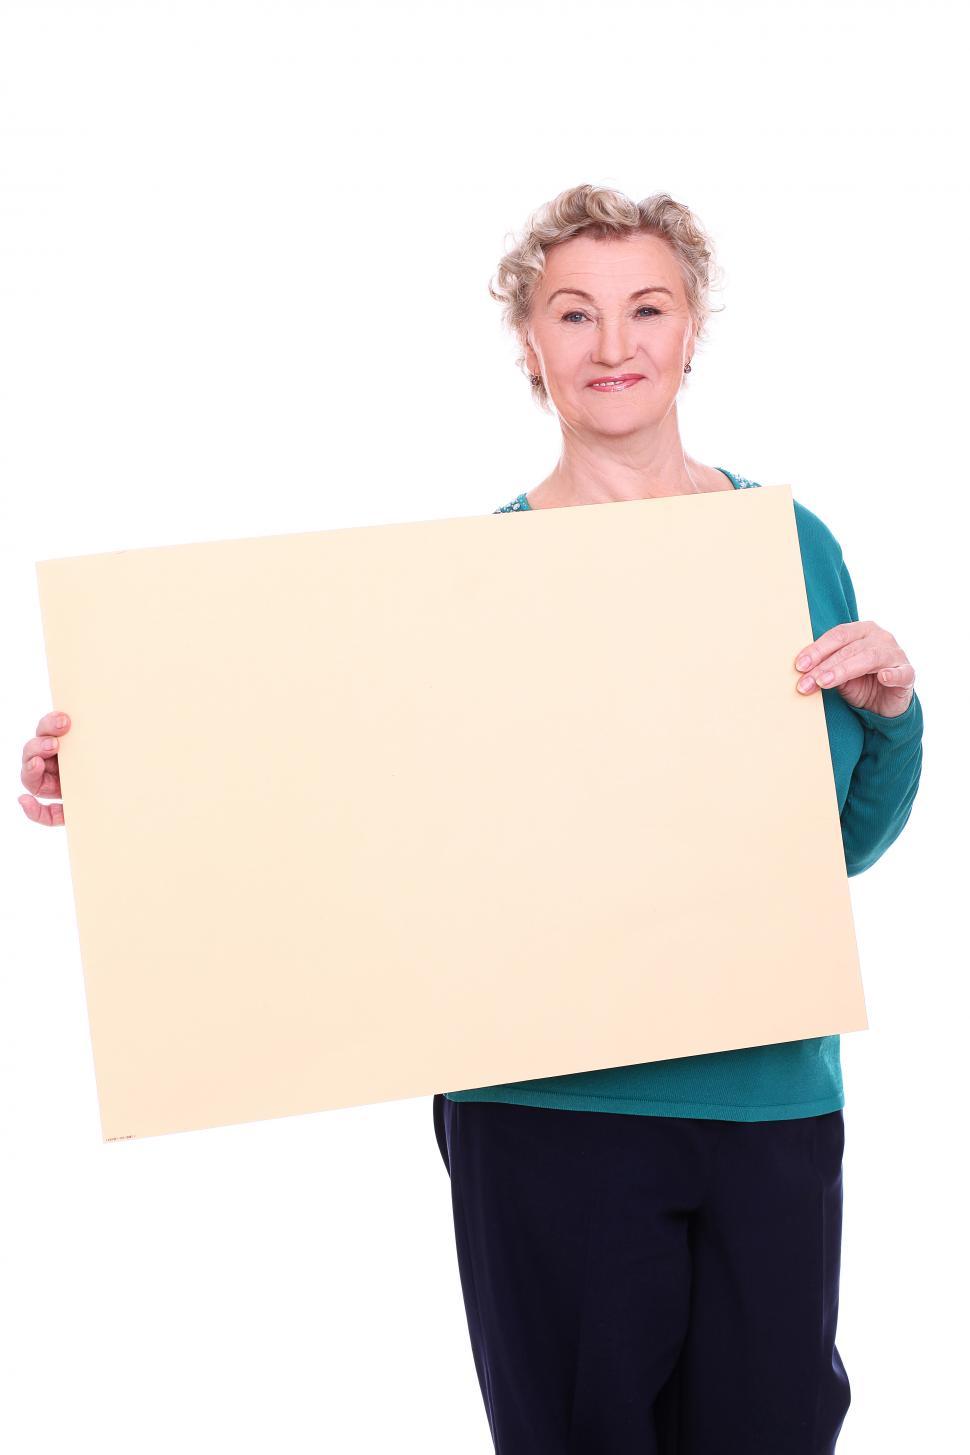 Free Image of Mature woman holding a blank sign - add your text or message 